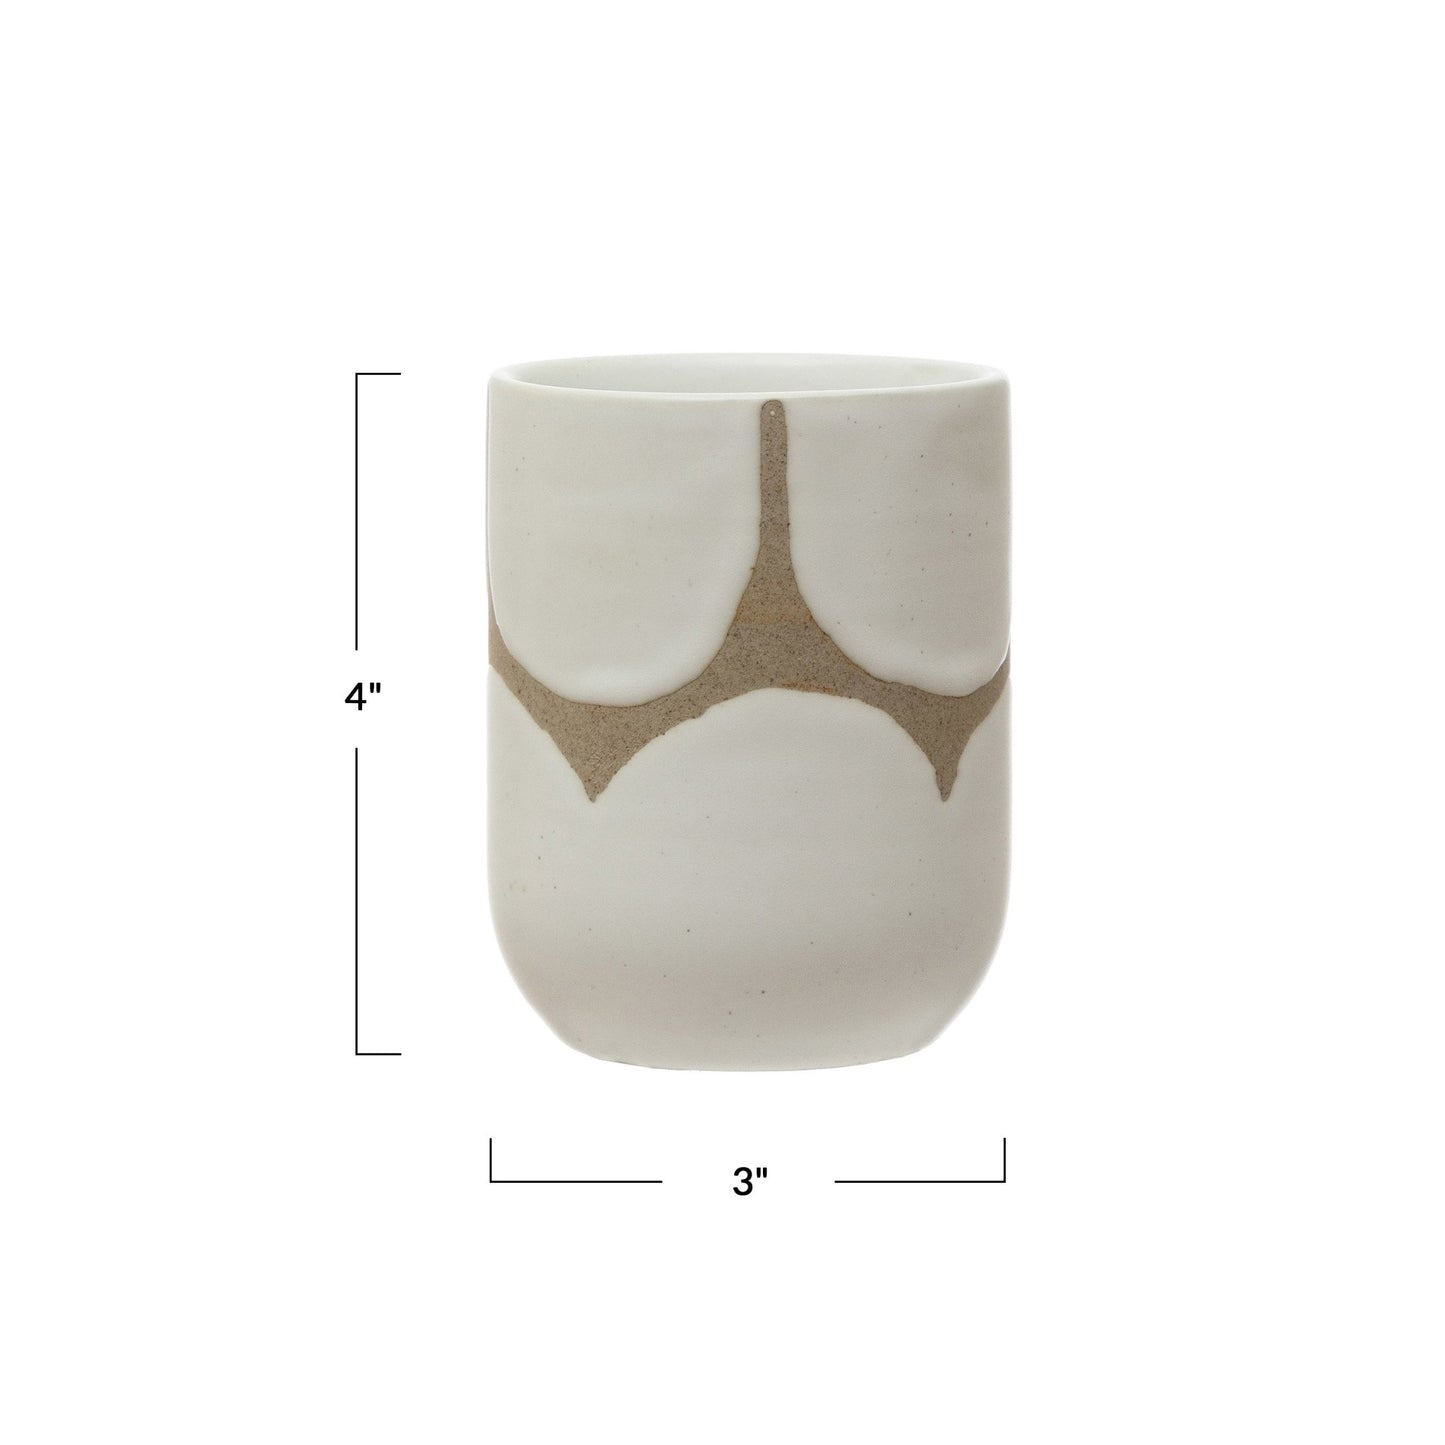 Hand-Painted Stoneware Cup with Scallop Design